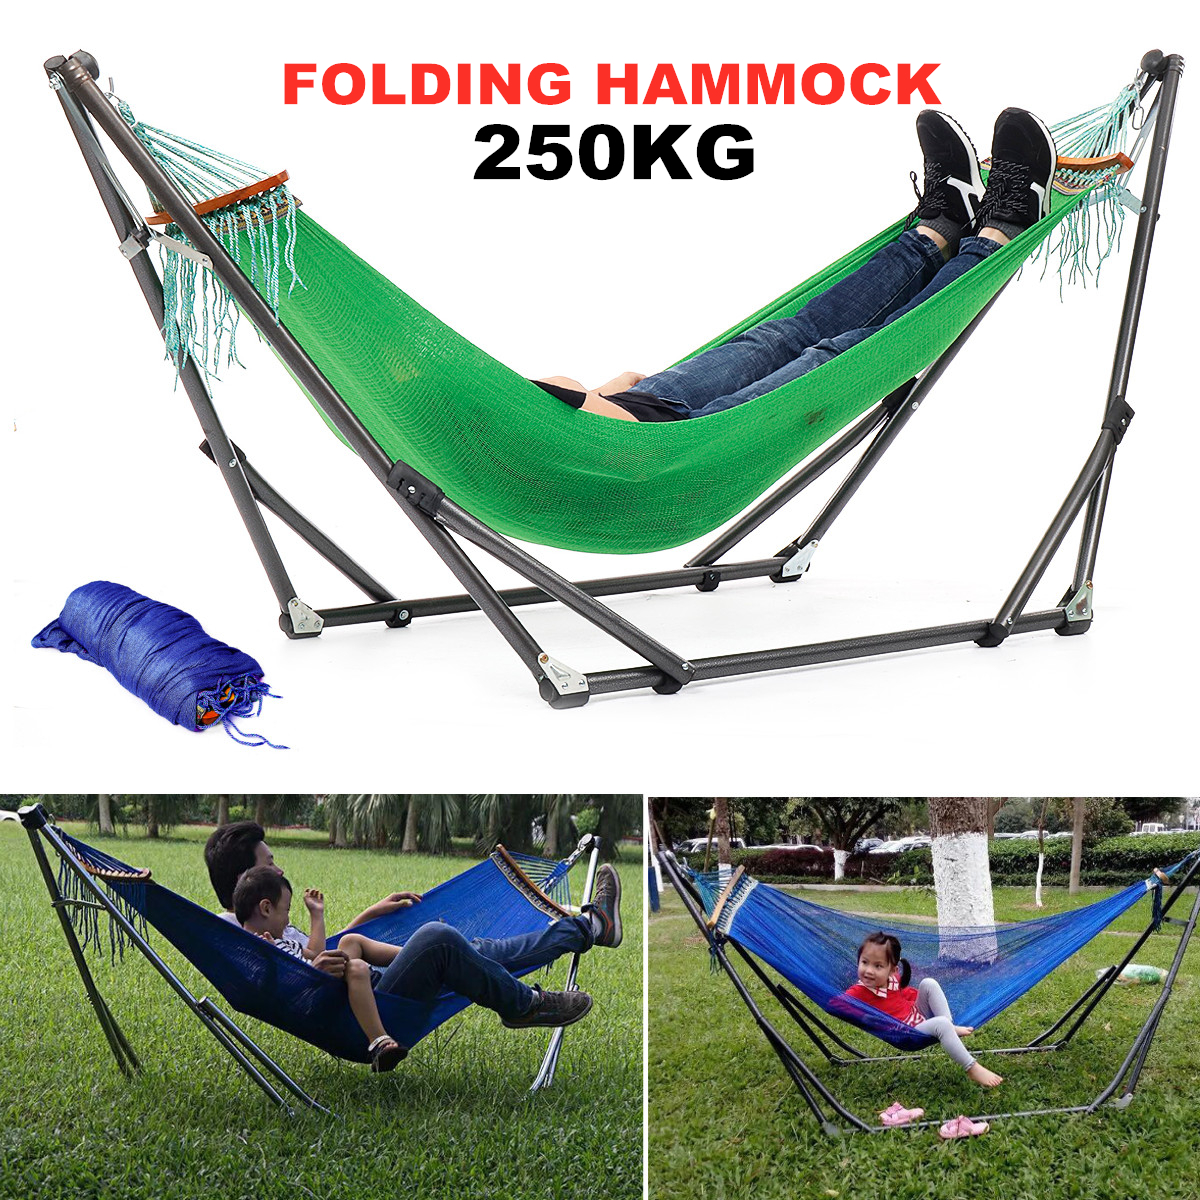 Portable Canvas Hammock Stand Portable Multifunctional Practical Outdoor Garden Swing Hammock Single Hanging Chair Bed Leisure Camping Travel 21